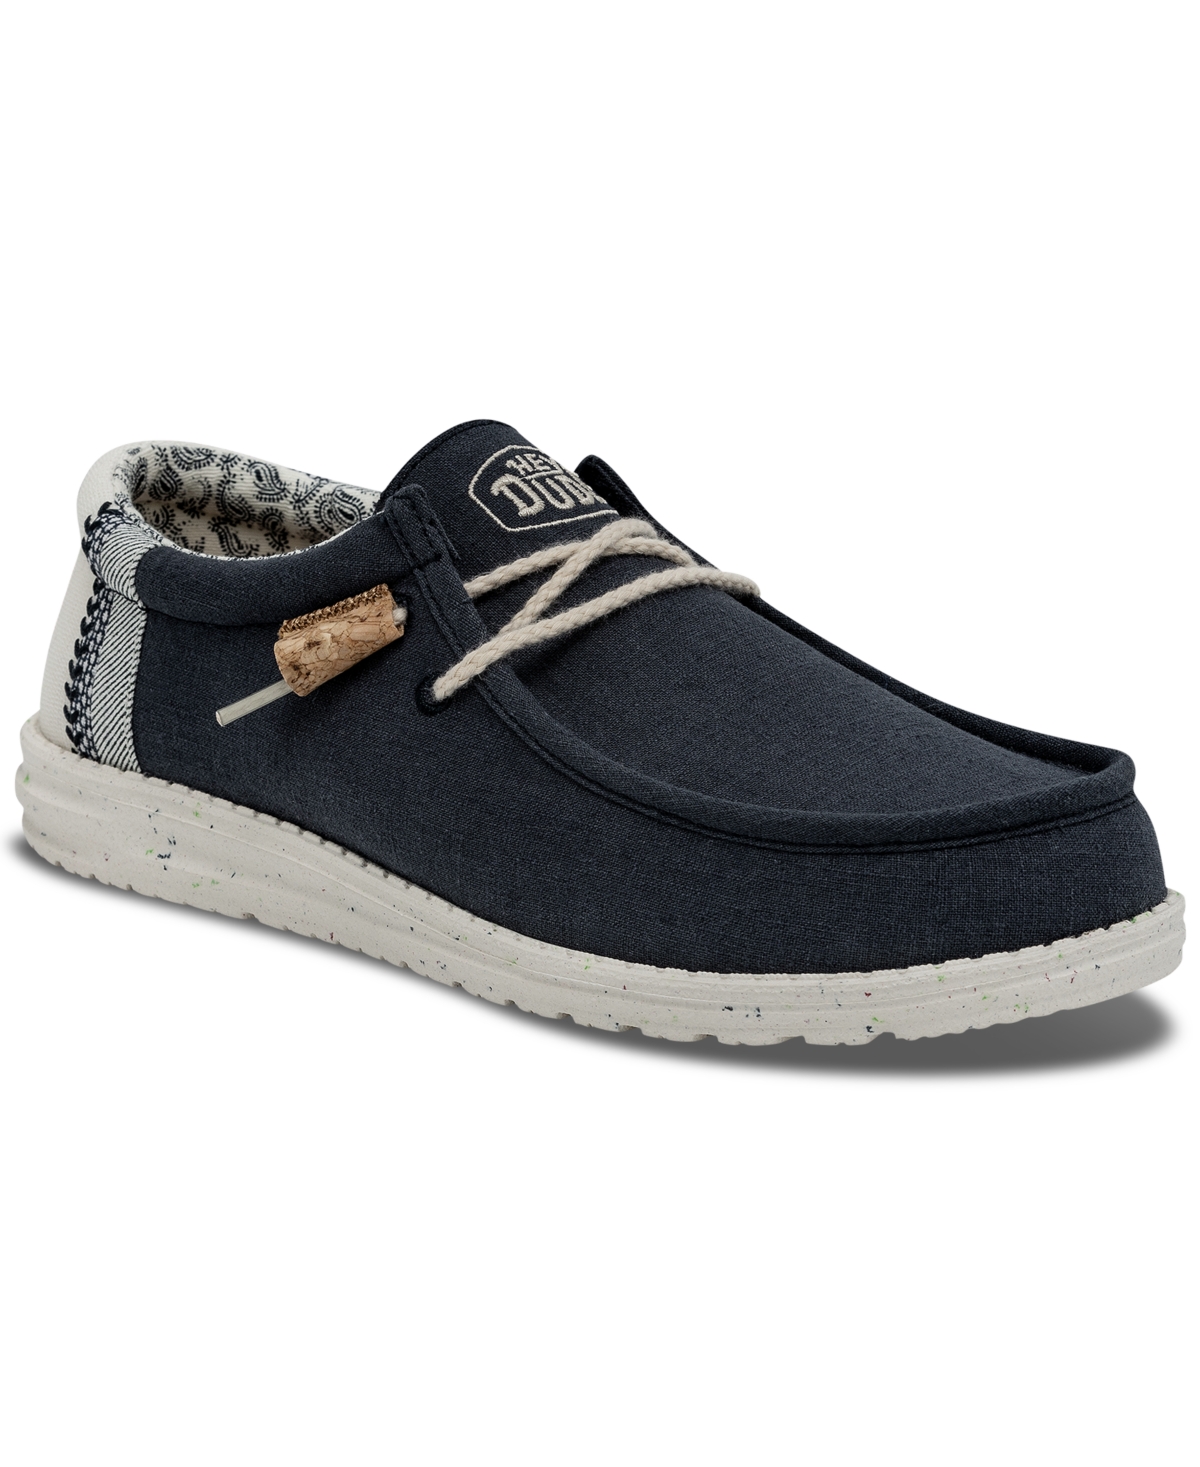 Men's Wally Linen Natural Casual Moccasin Sneakers from Finish Line - Navy